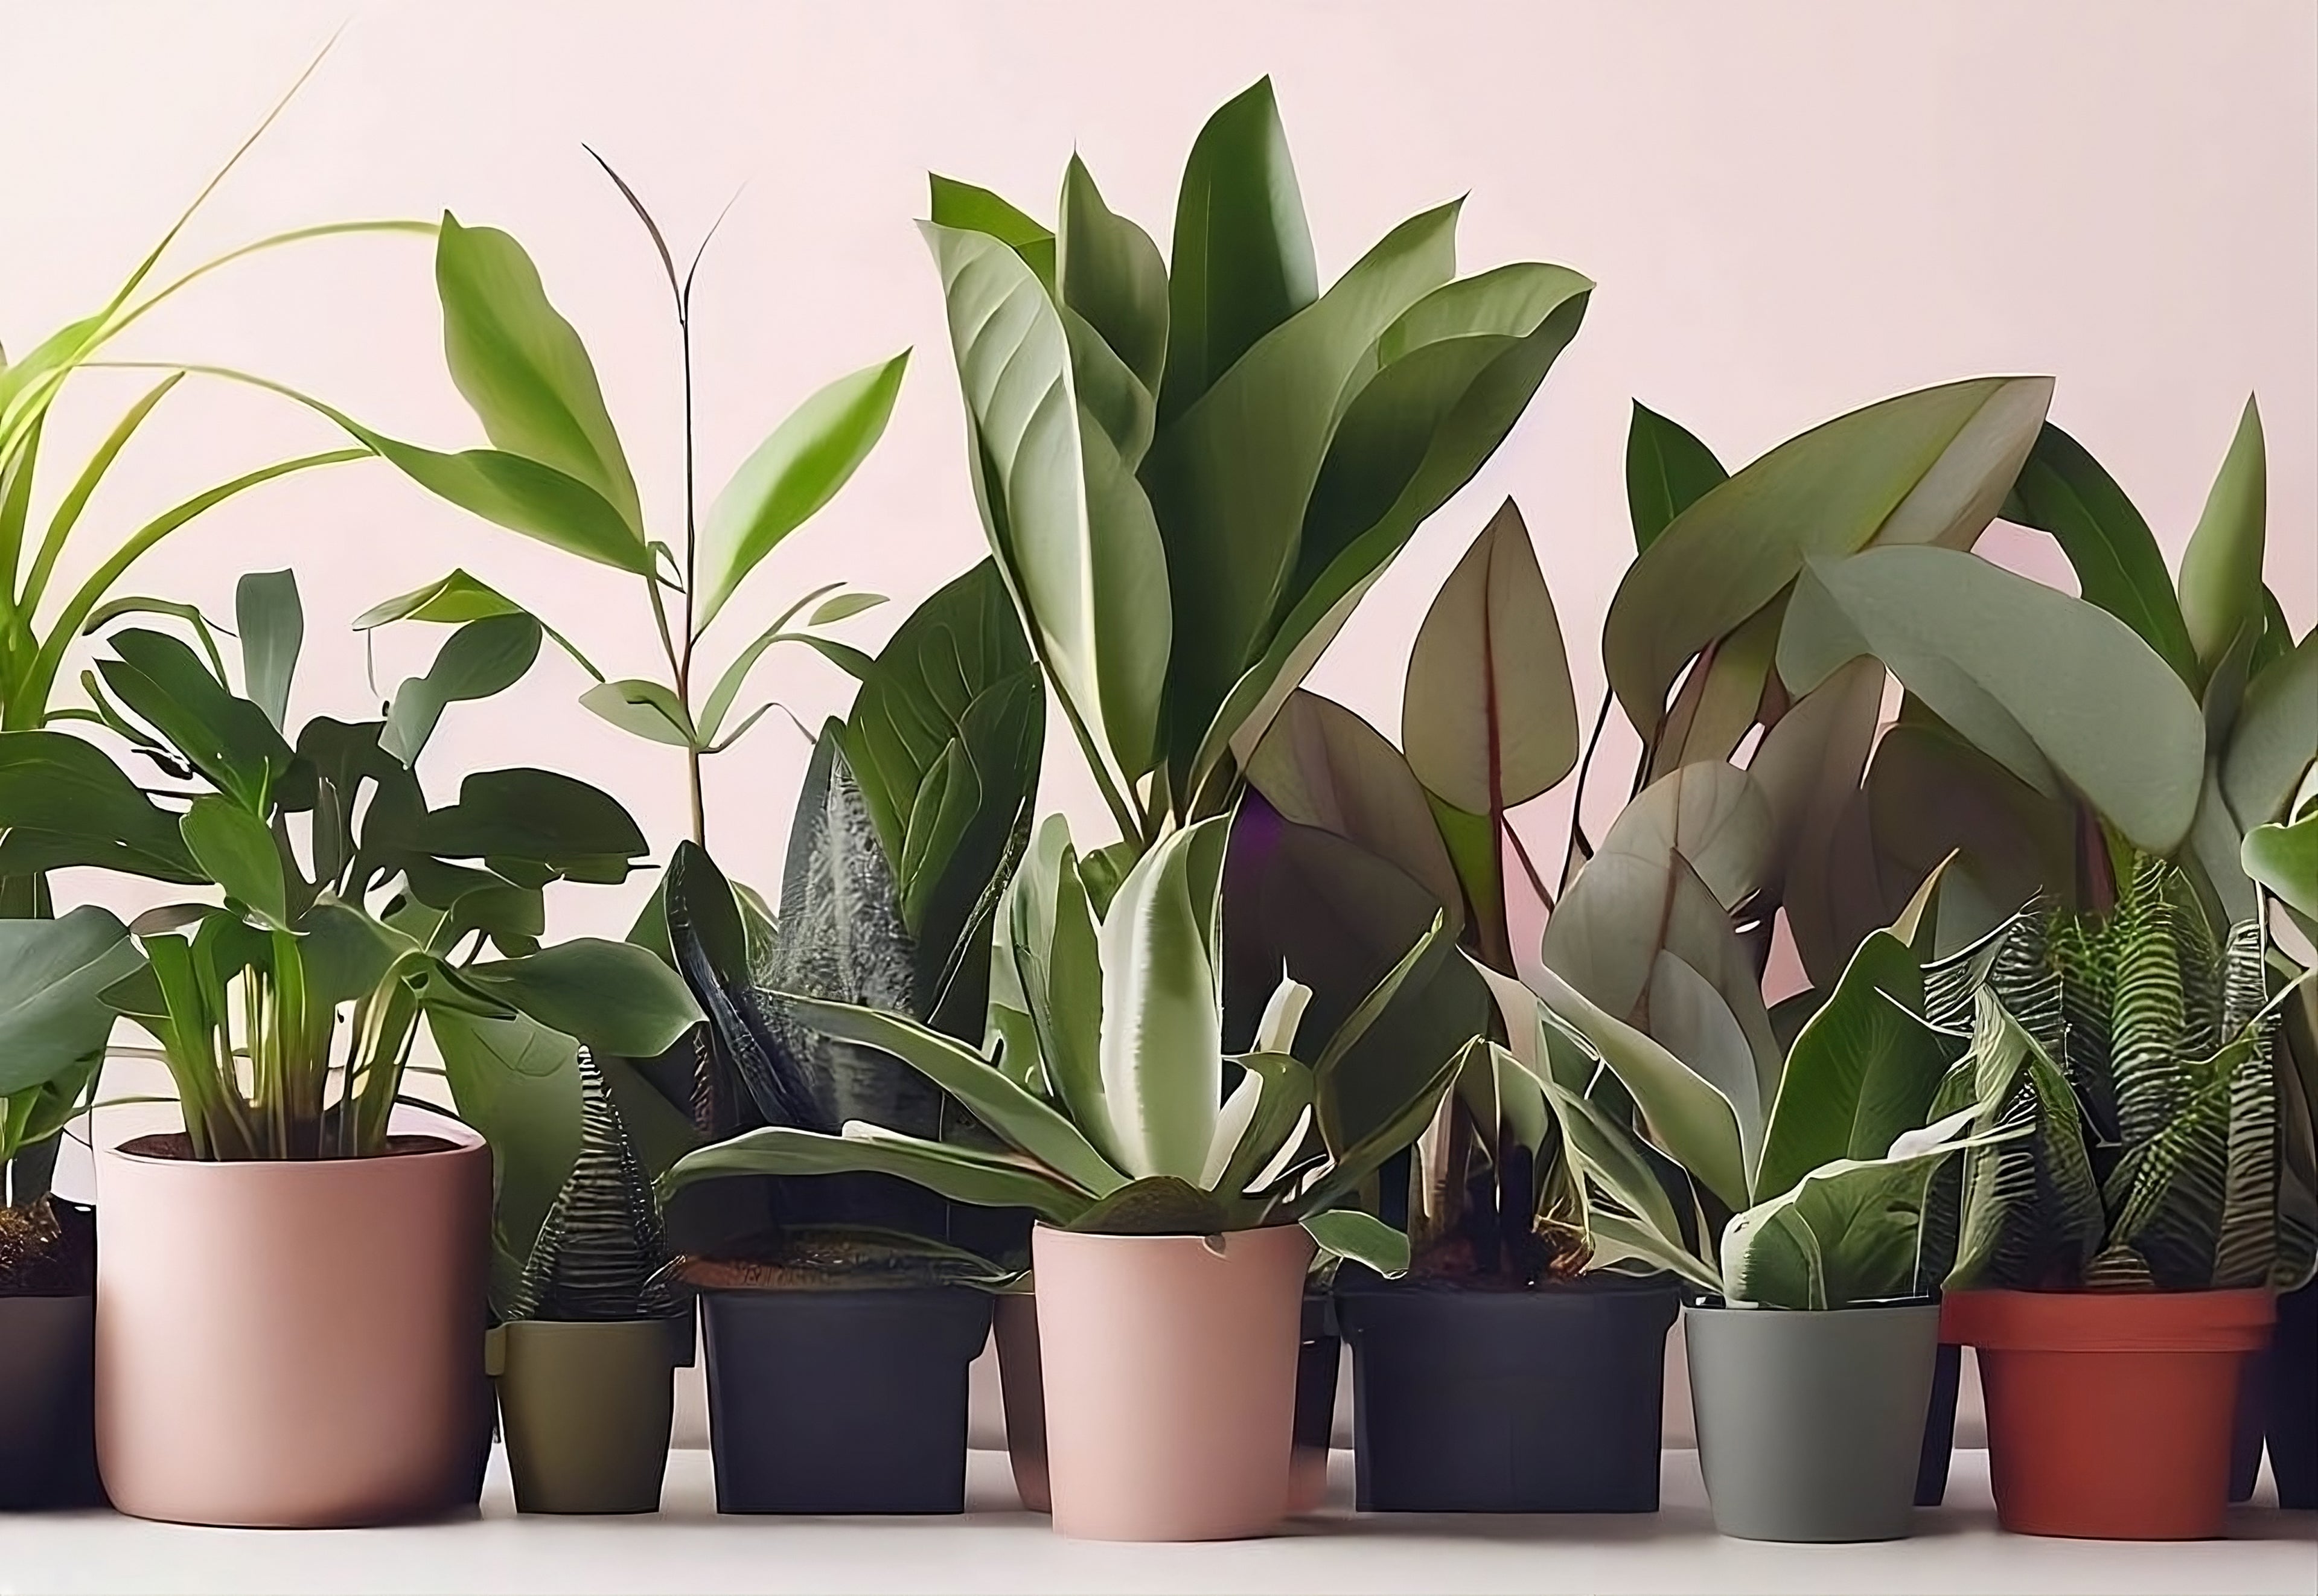 Using Boxes For Houseplants: How To Make An Indoor Planter Box